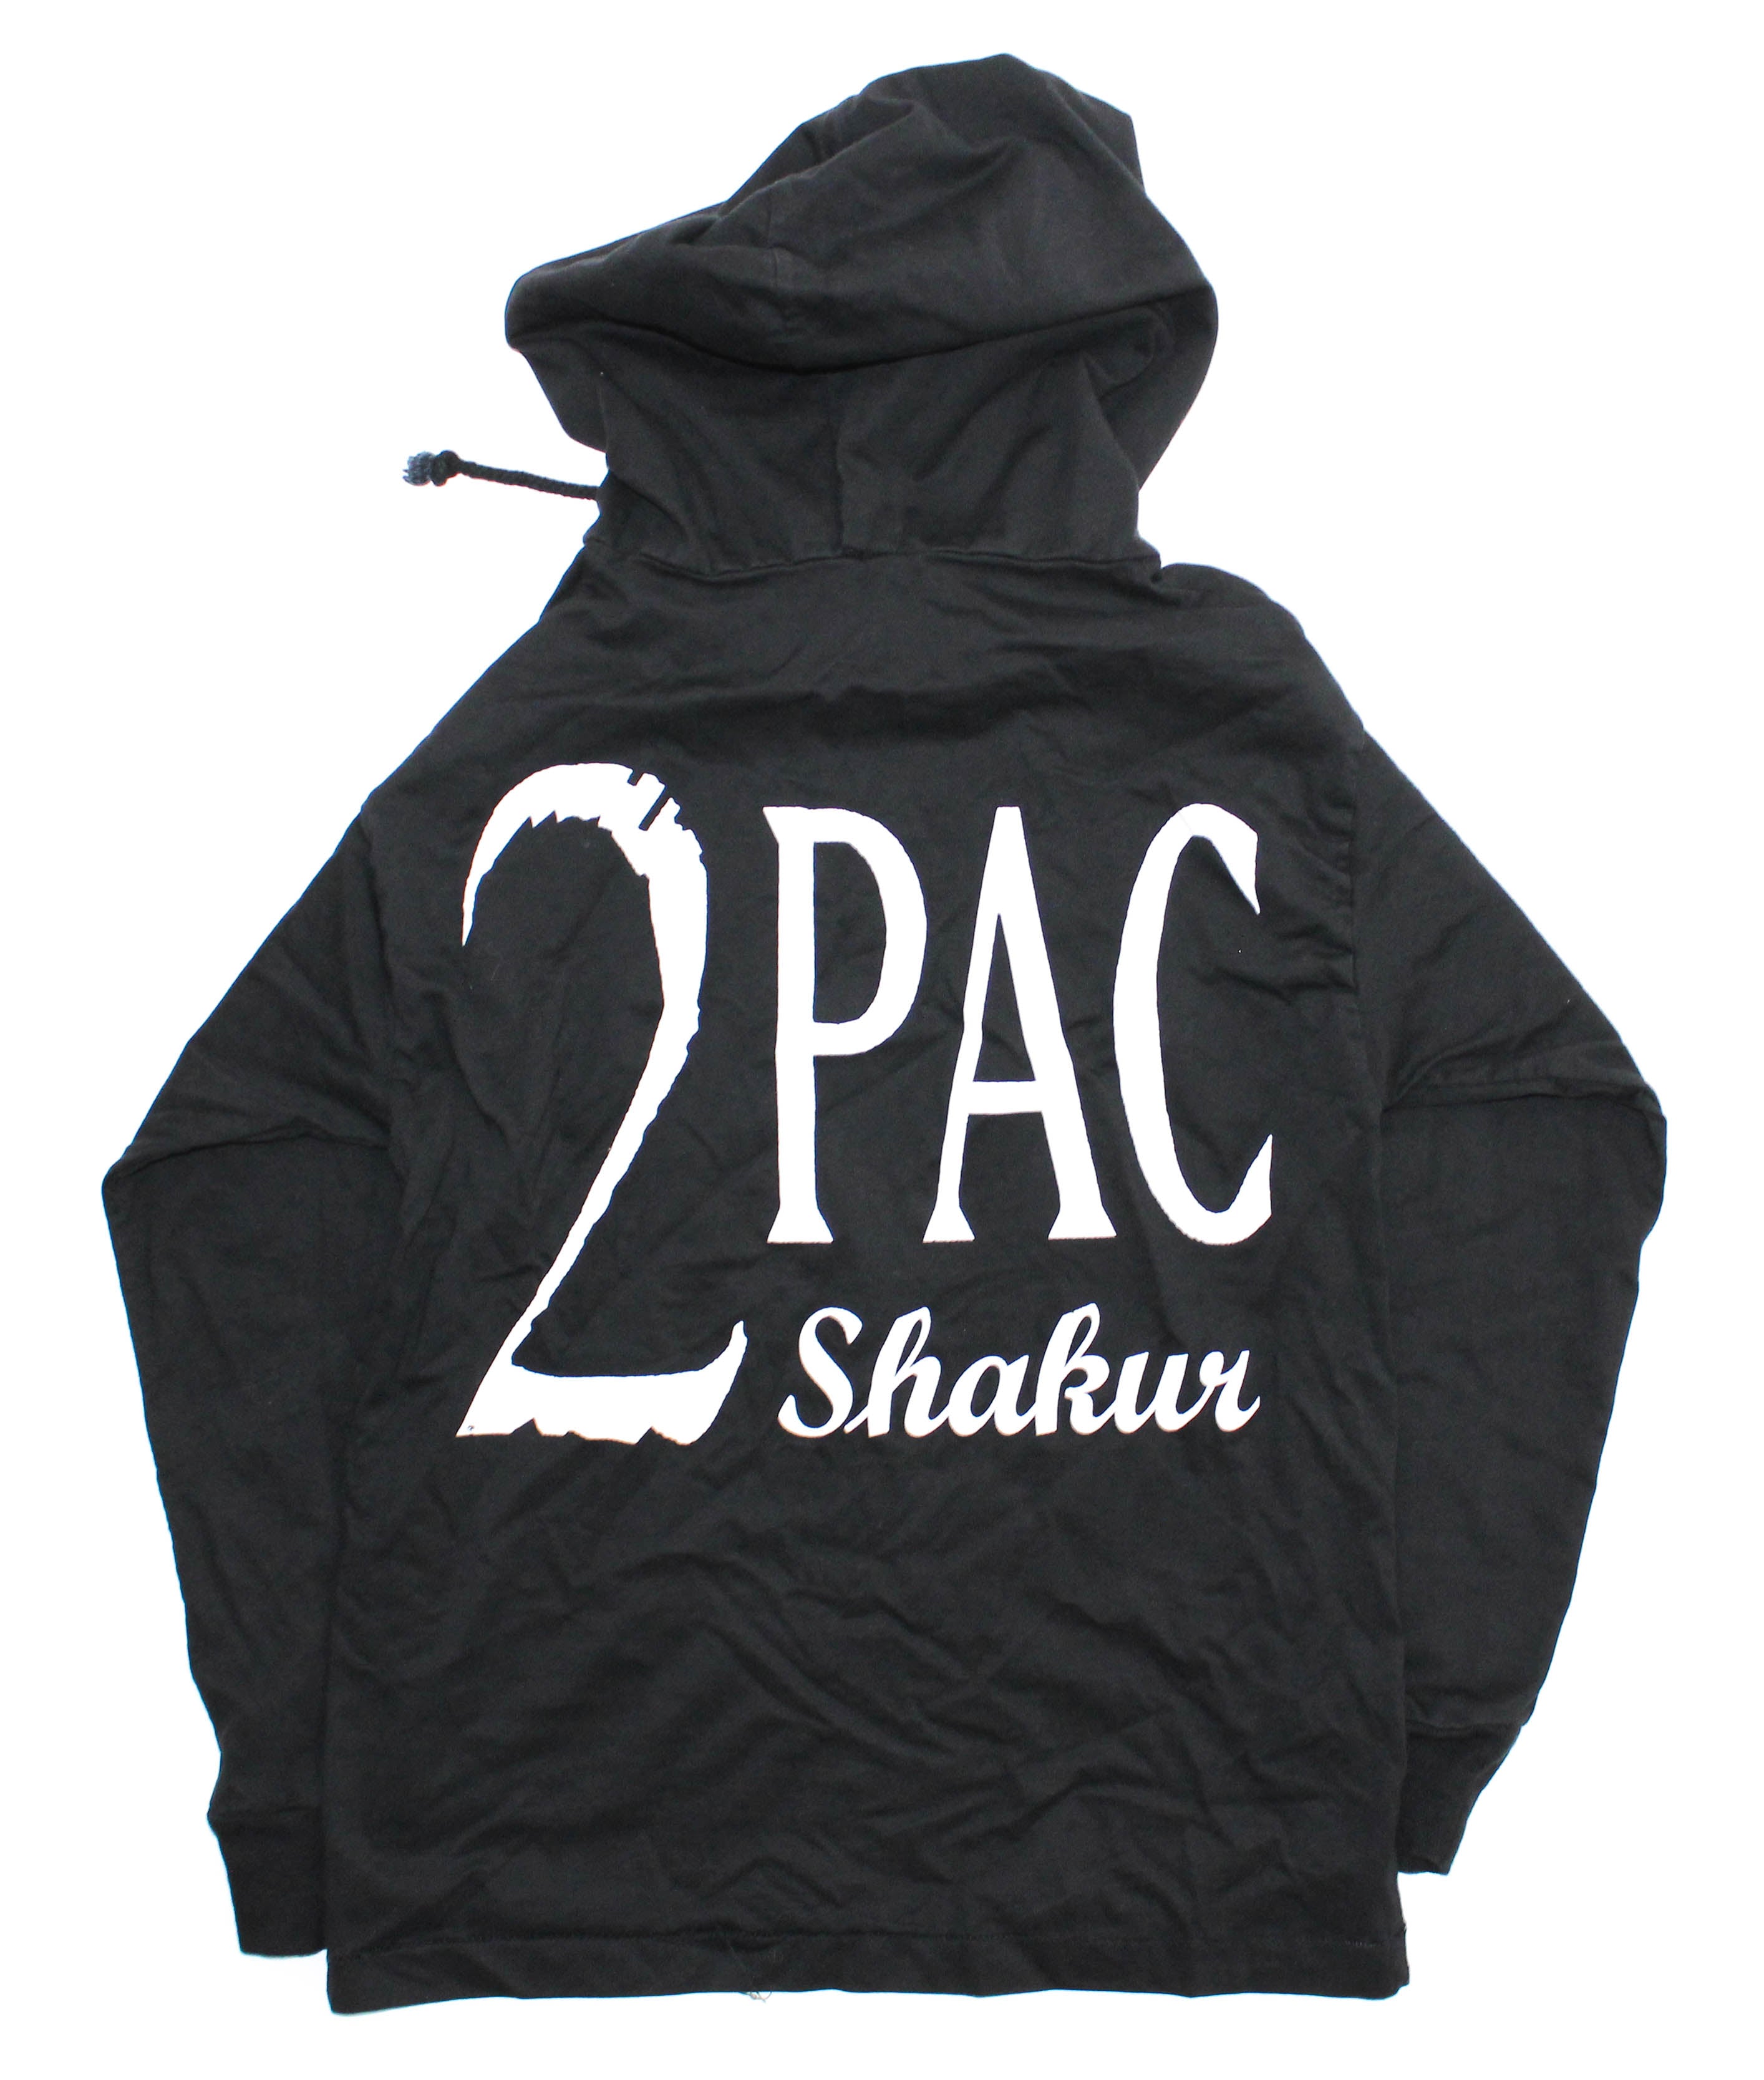 2Pac Reworked 90s Hooded Long Sleeve Youth XS *1 of 1*